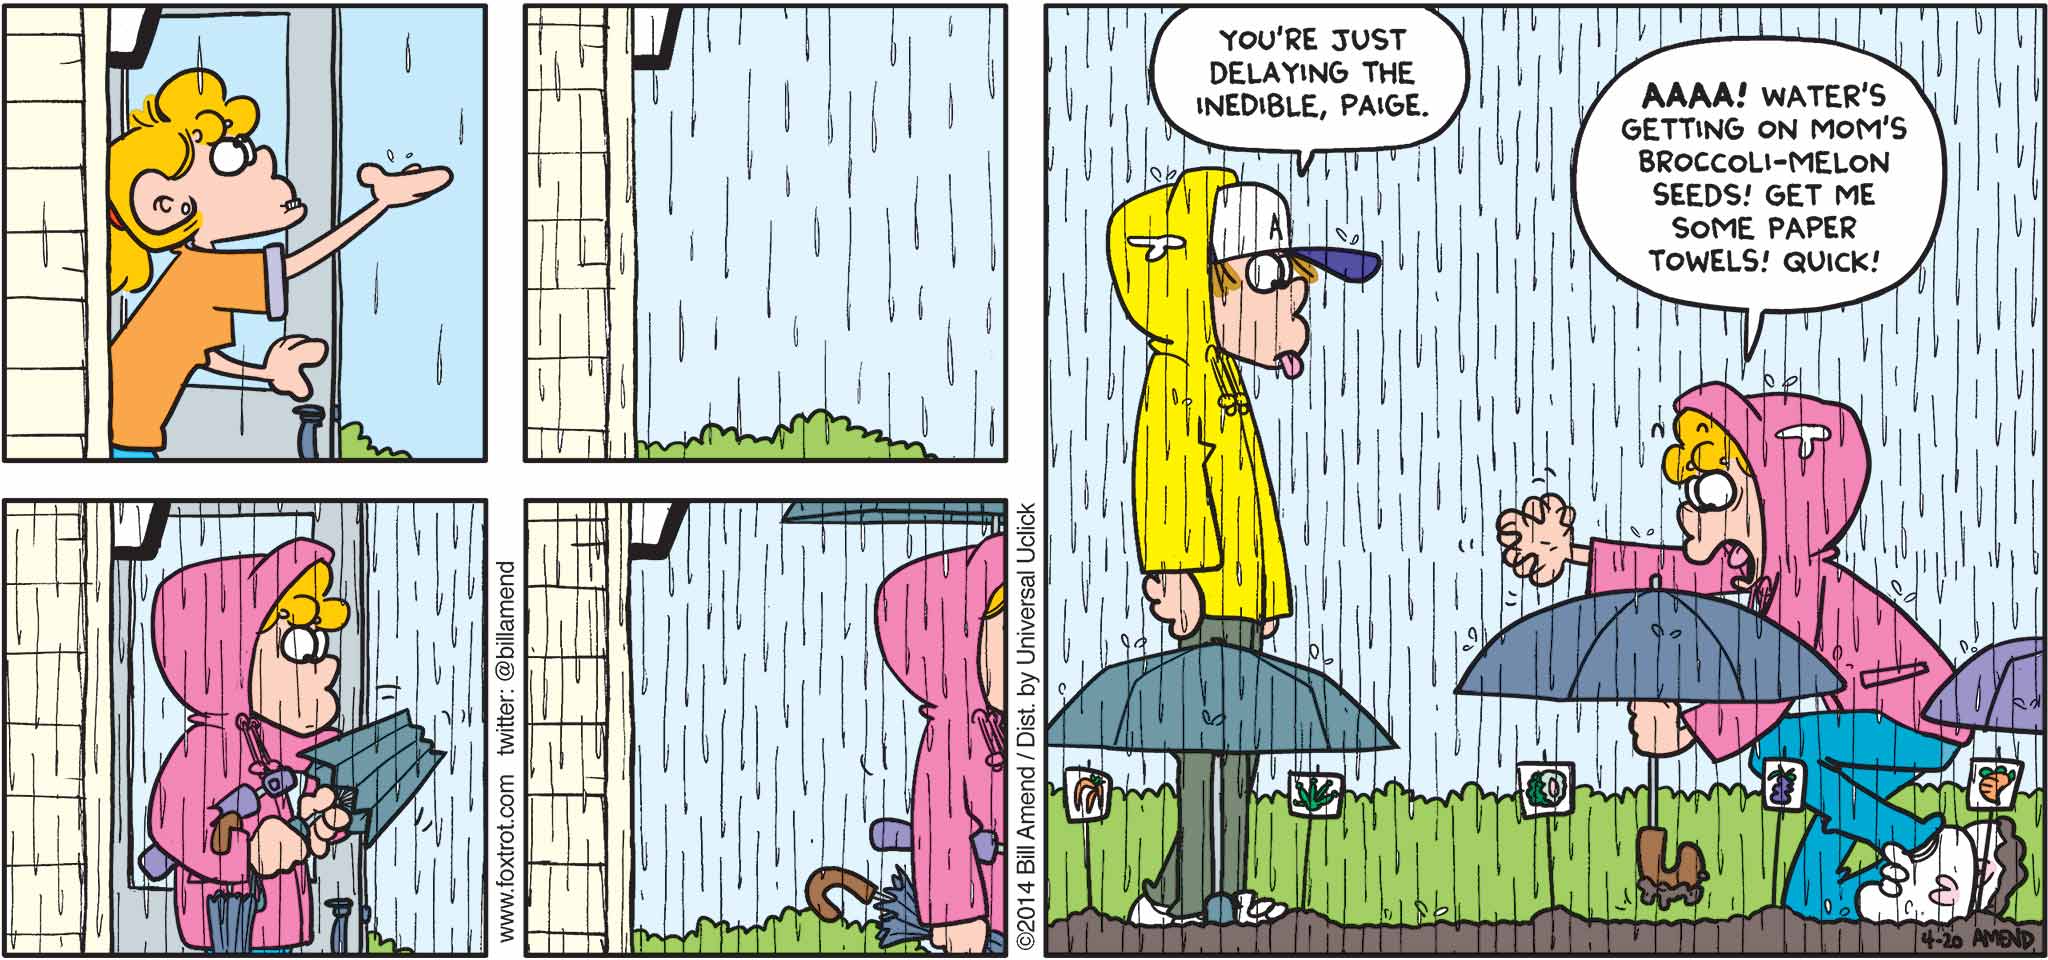 FoxTrot by Bill Amend - "Who'll Stop the Rain?" published April 20, 2014 - Peter: You're just delaying the inedible, Paige. Paige: AAAA! Water's getting on mom's broccoli-melon seeds! Get me some paper towels! Quick!